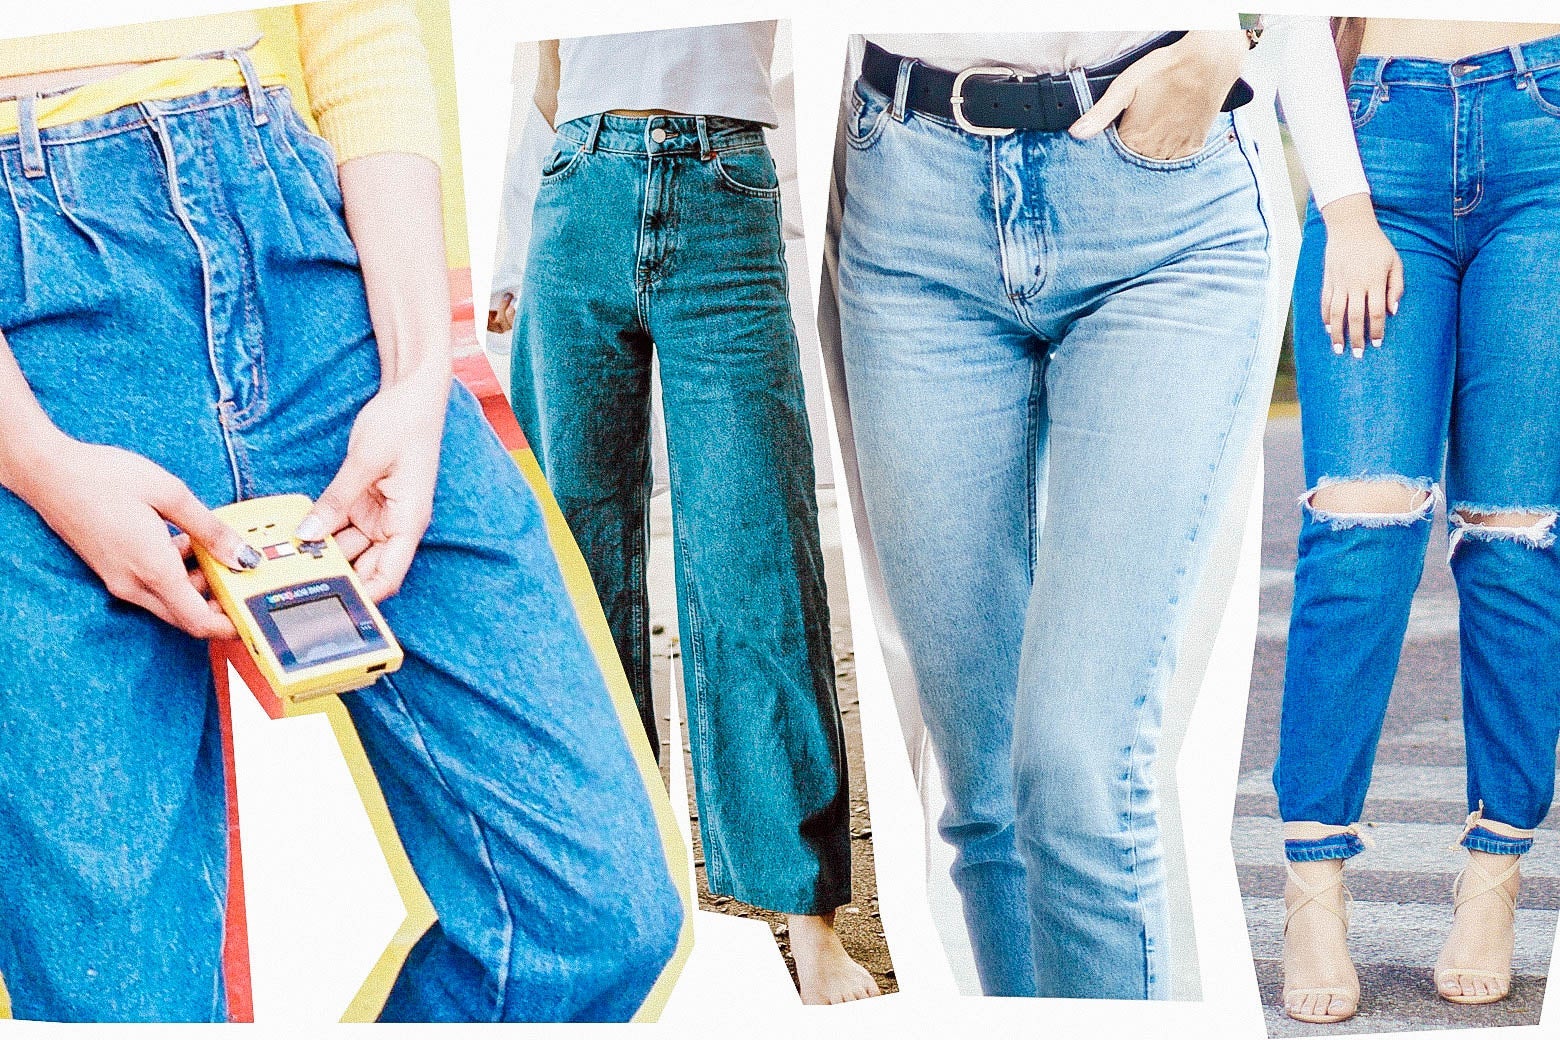 Four different styles of jeans